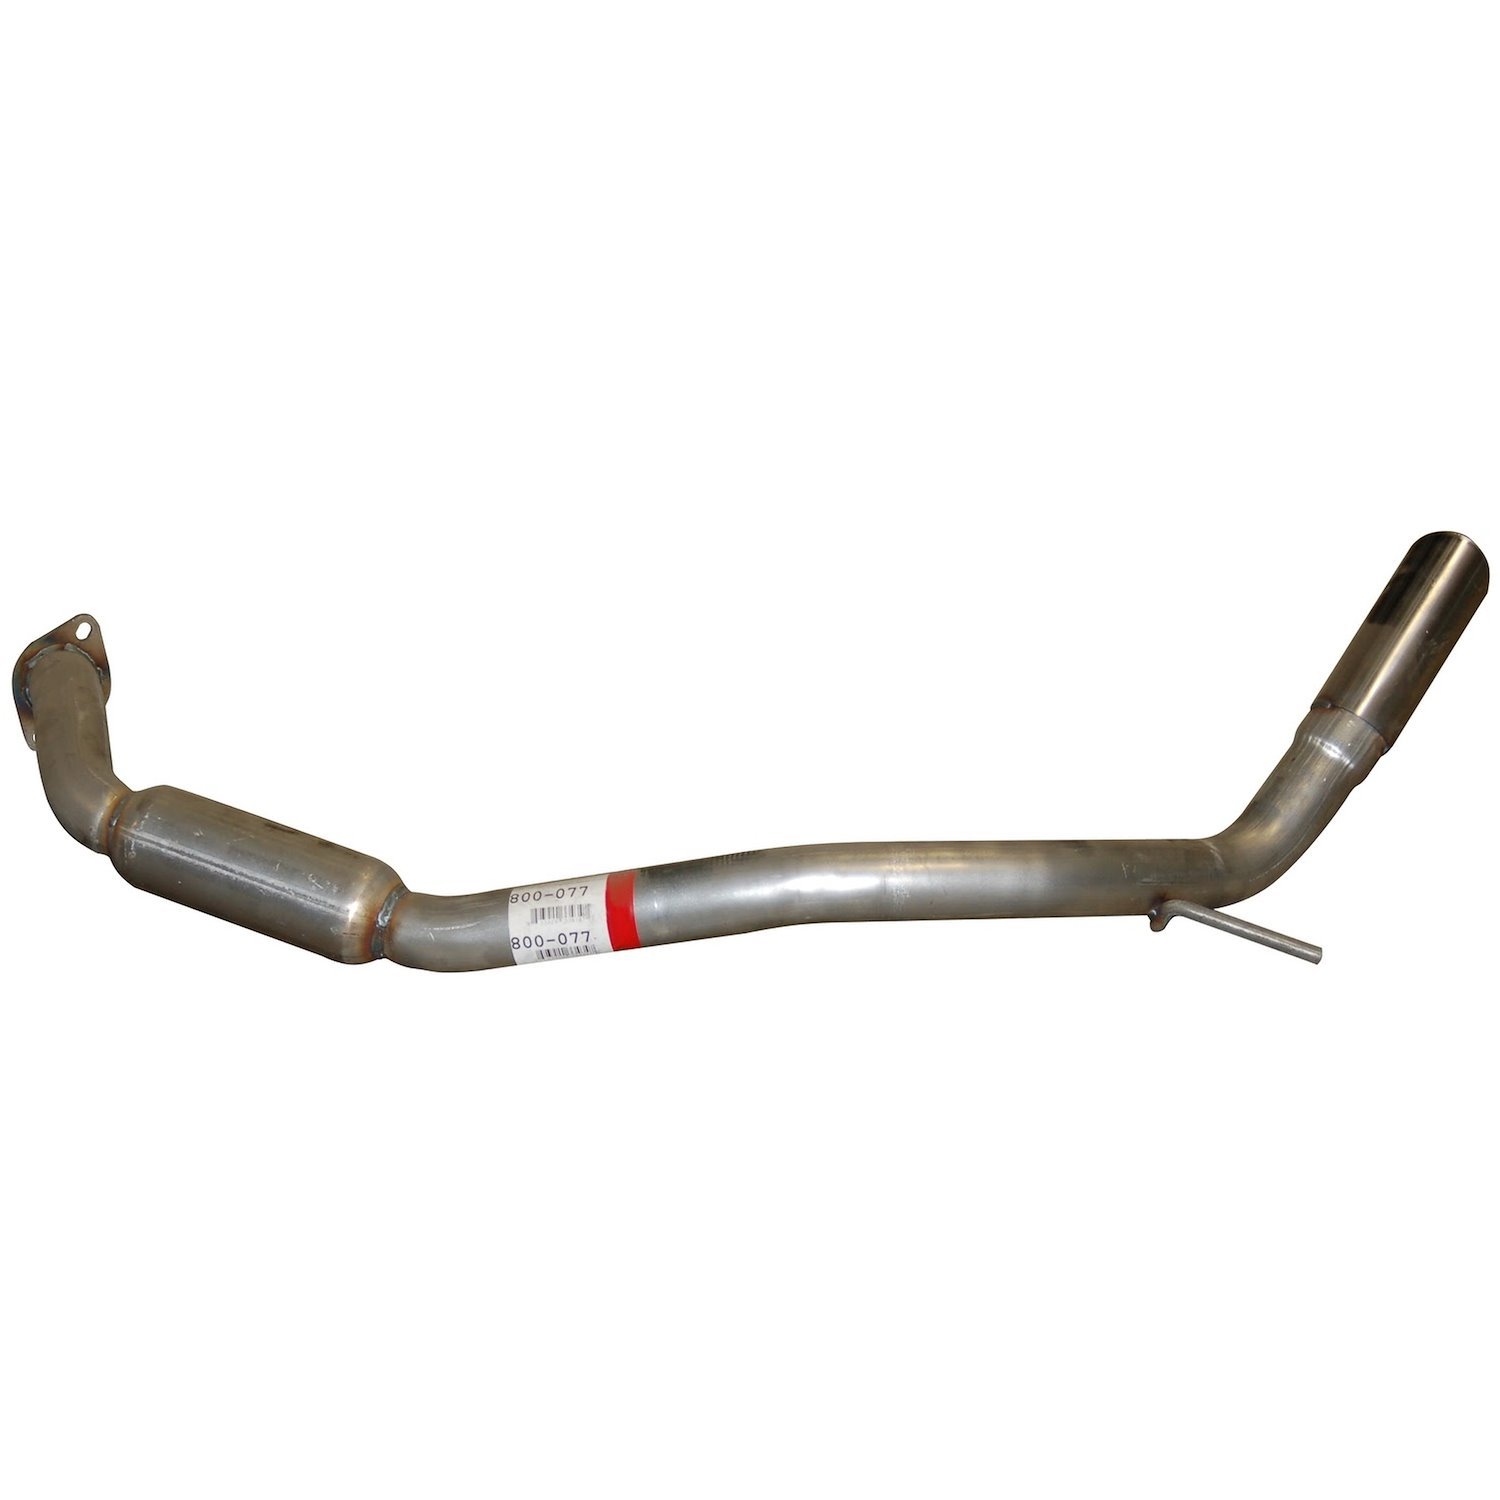 Direct-Fit Exhaust Tail Pipe, 2007-2015 Nissan Armada, Infiniti